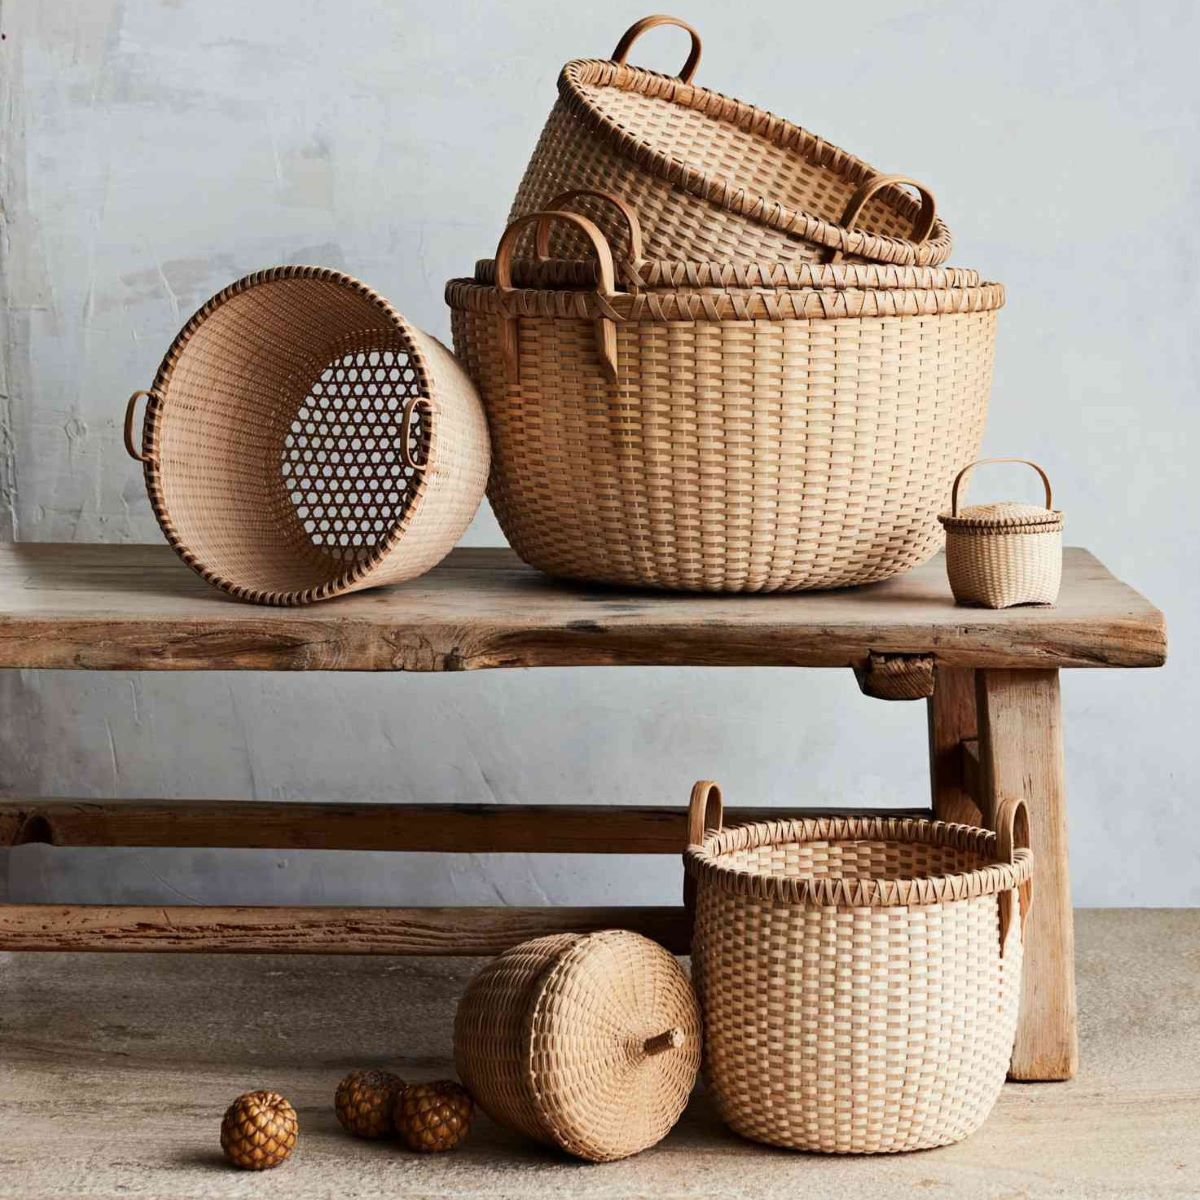 How To Store Baskets